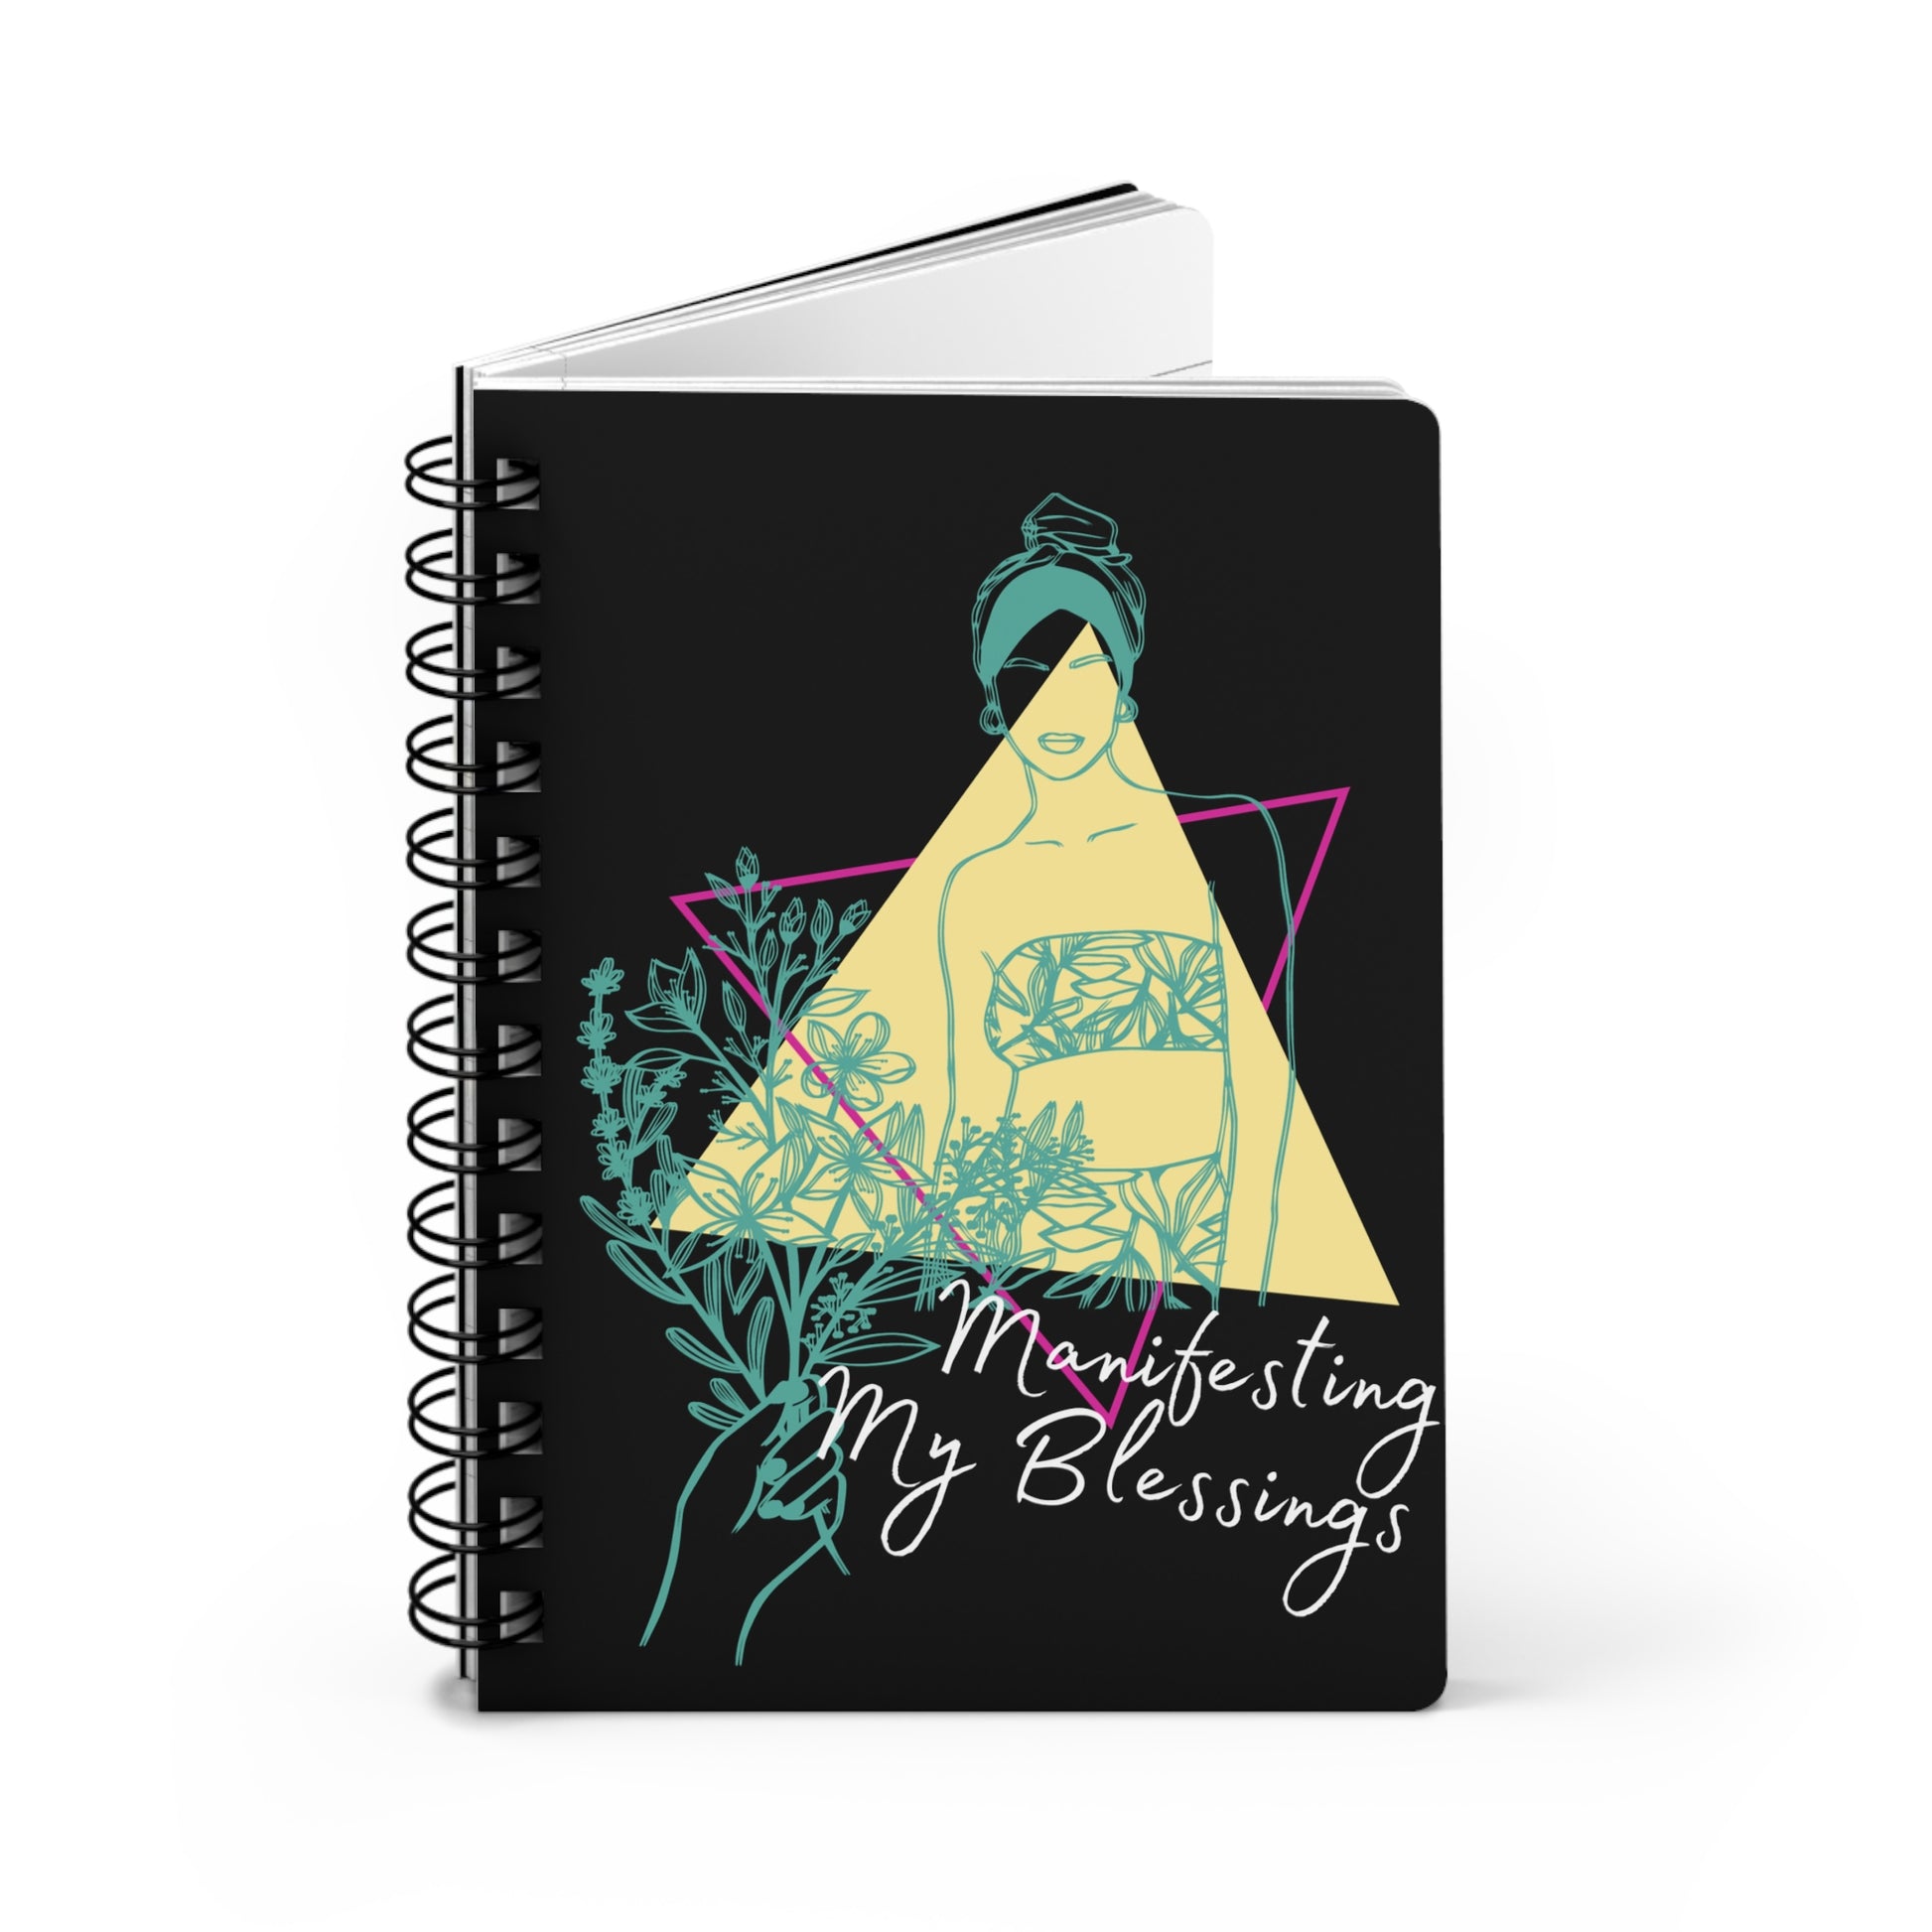 An "Manifesting My Blessings" Daily Affirmation Journal with the words "Meditate my blessings" on a black spiral notebook.